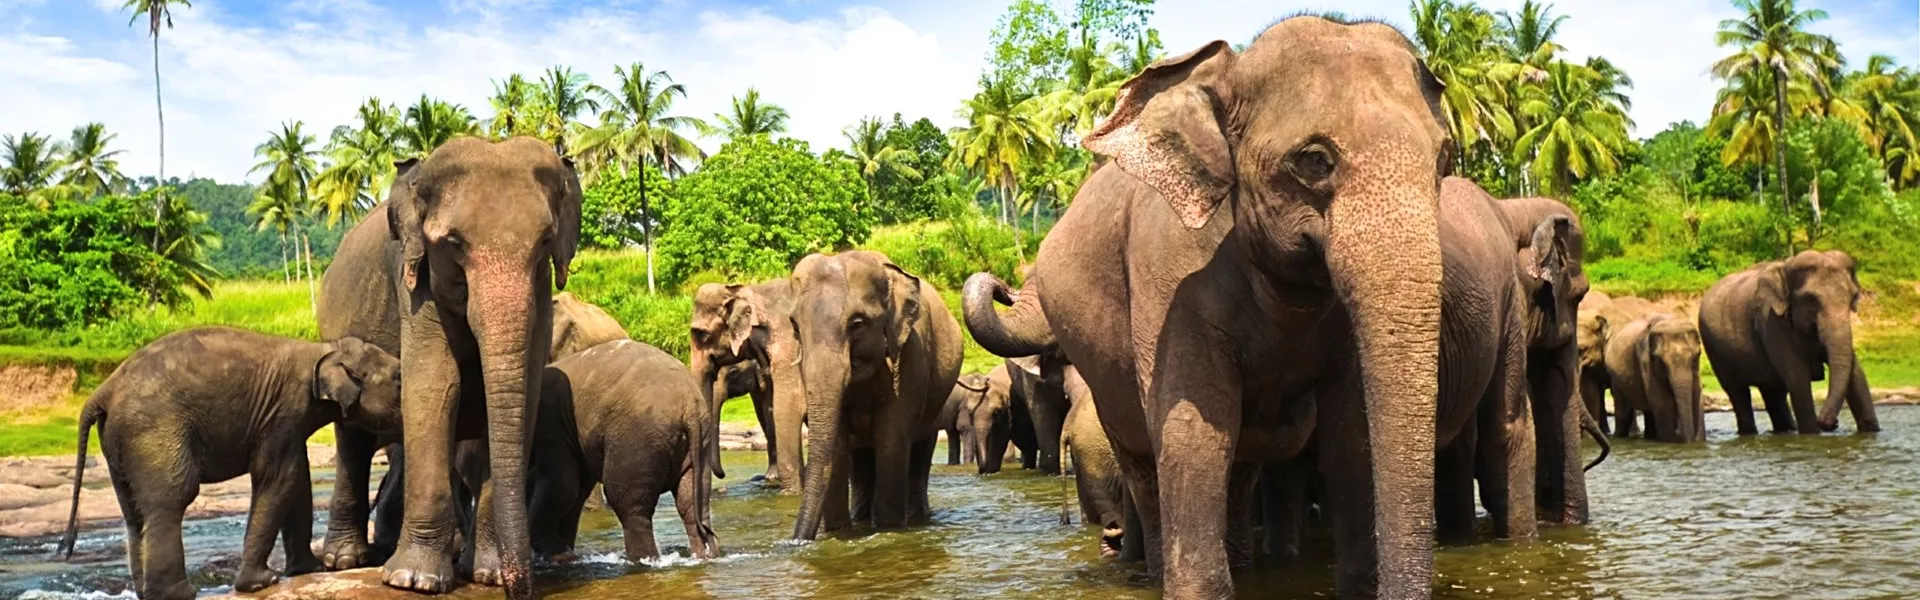 A herd of elephants standing in a body of water among palms